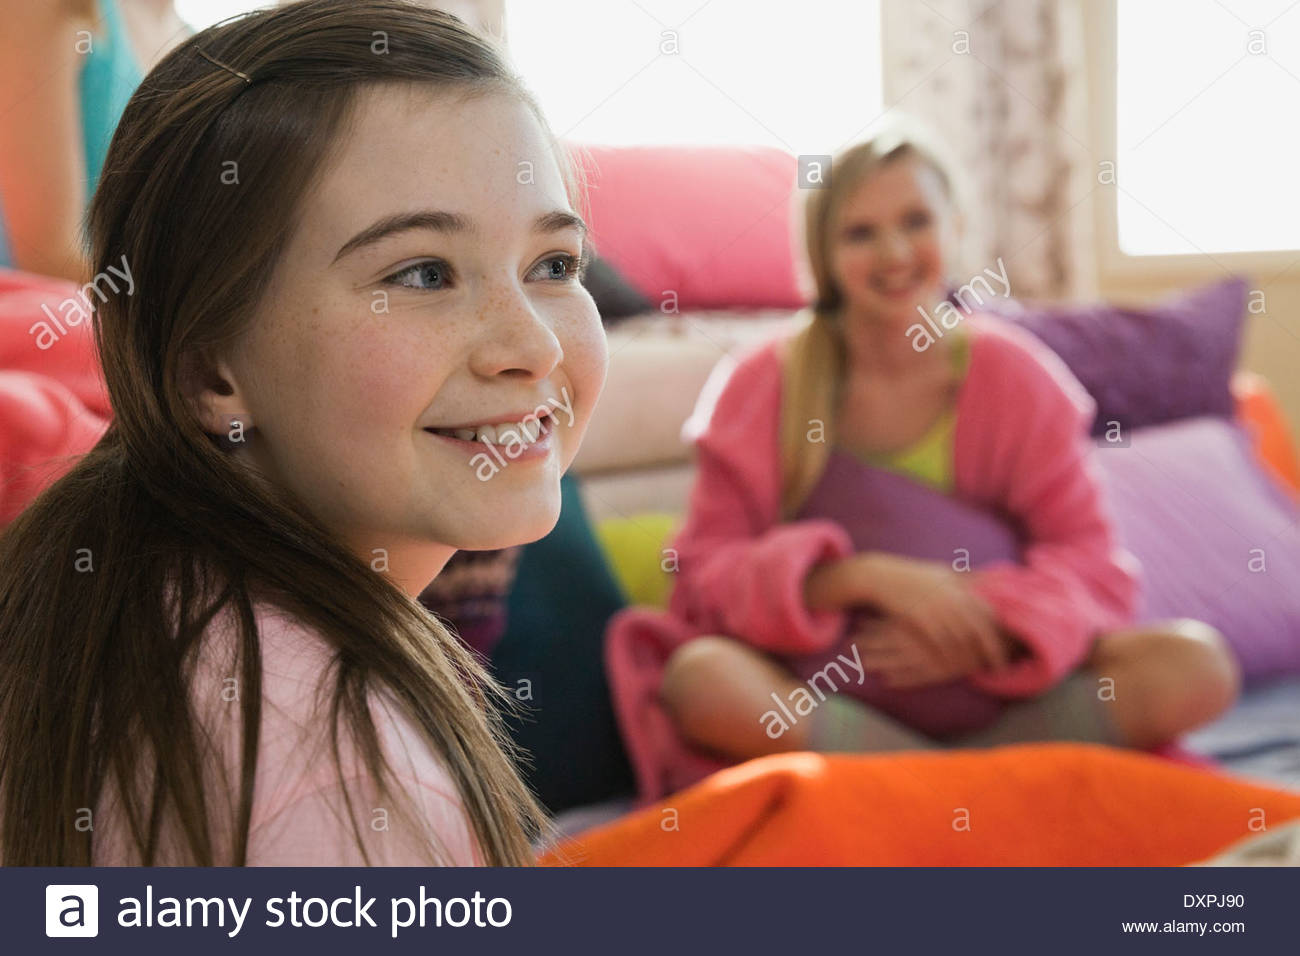 Smiling girl looking at slumber party Banque D'Images